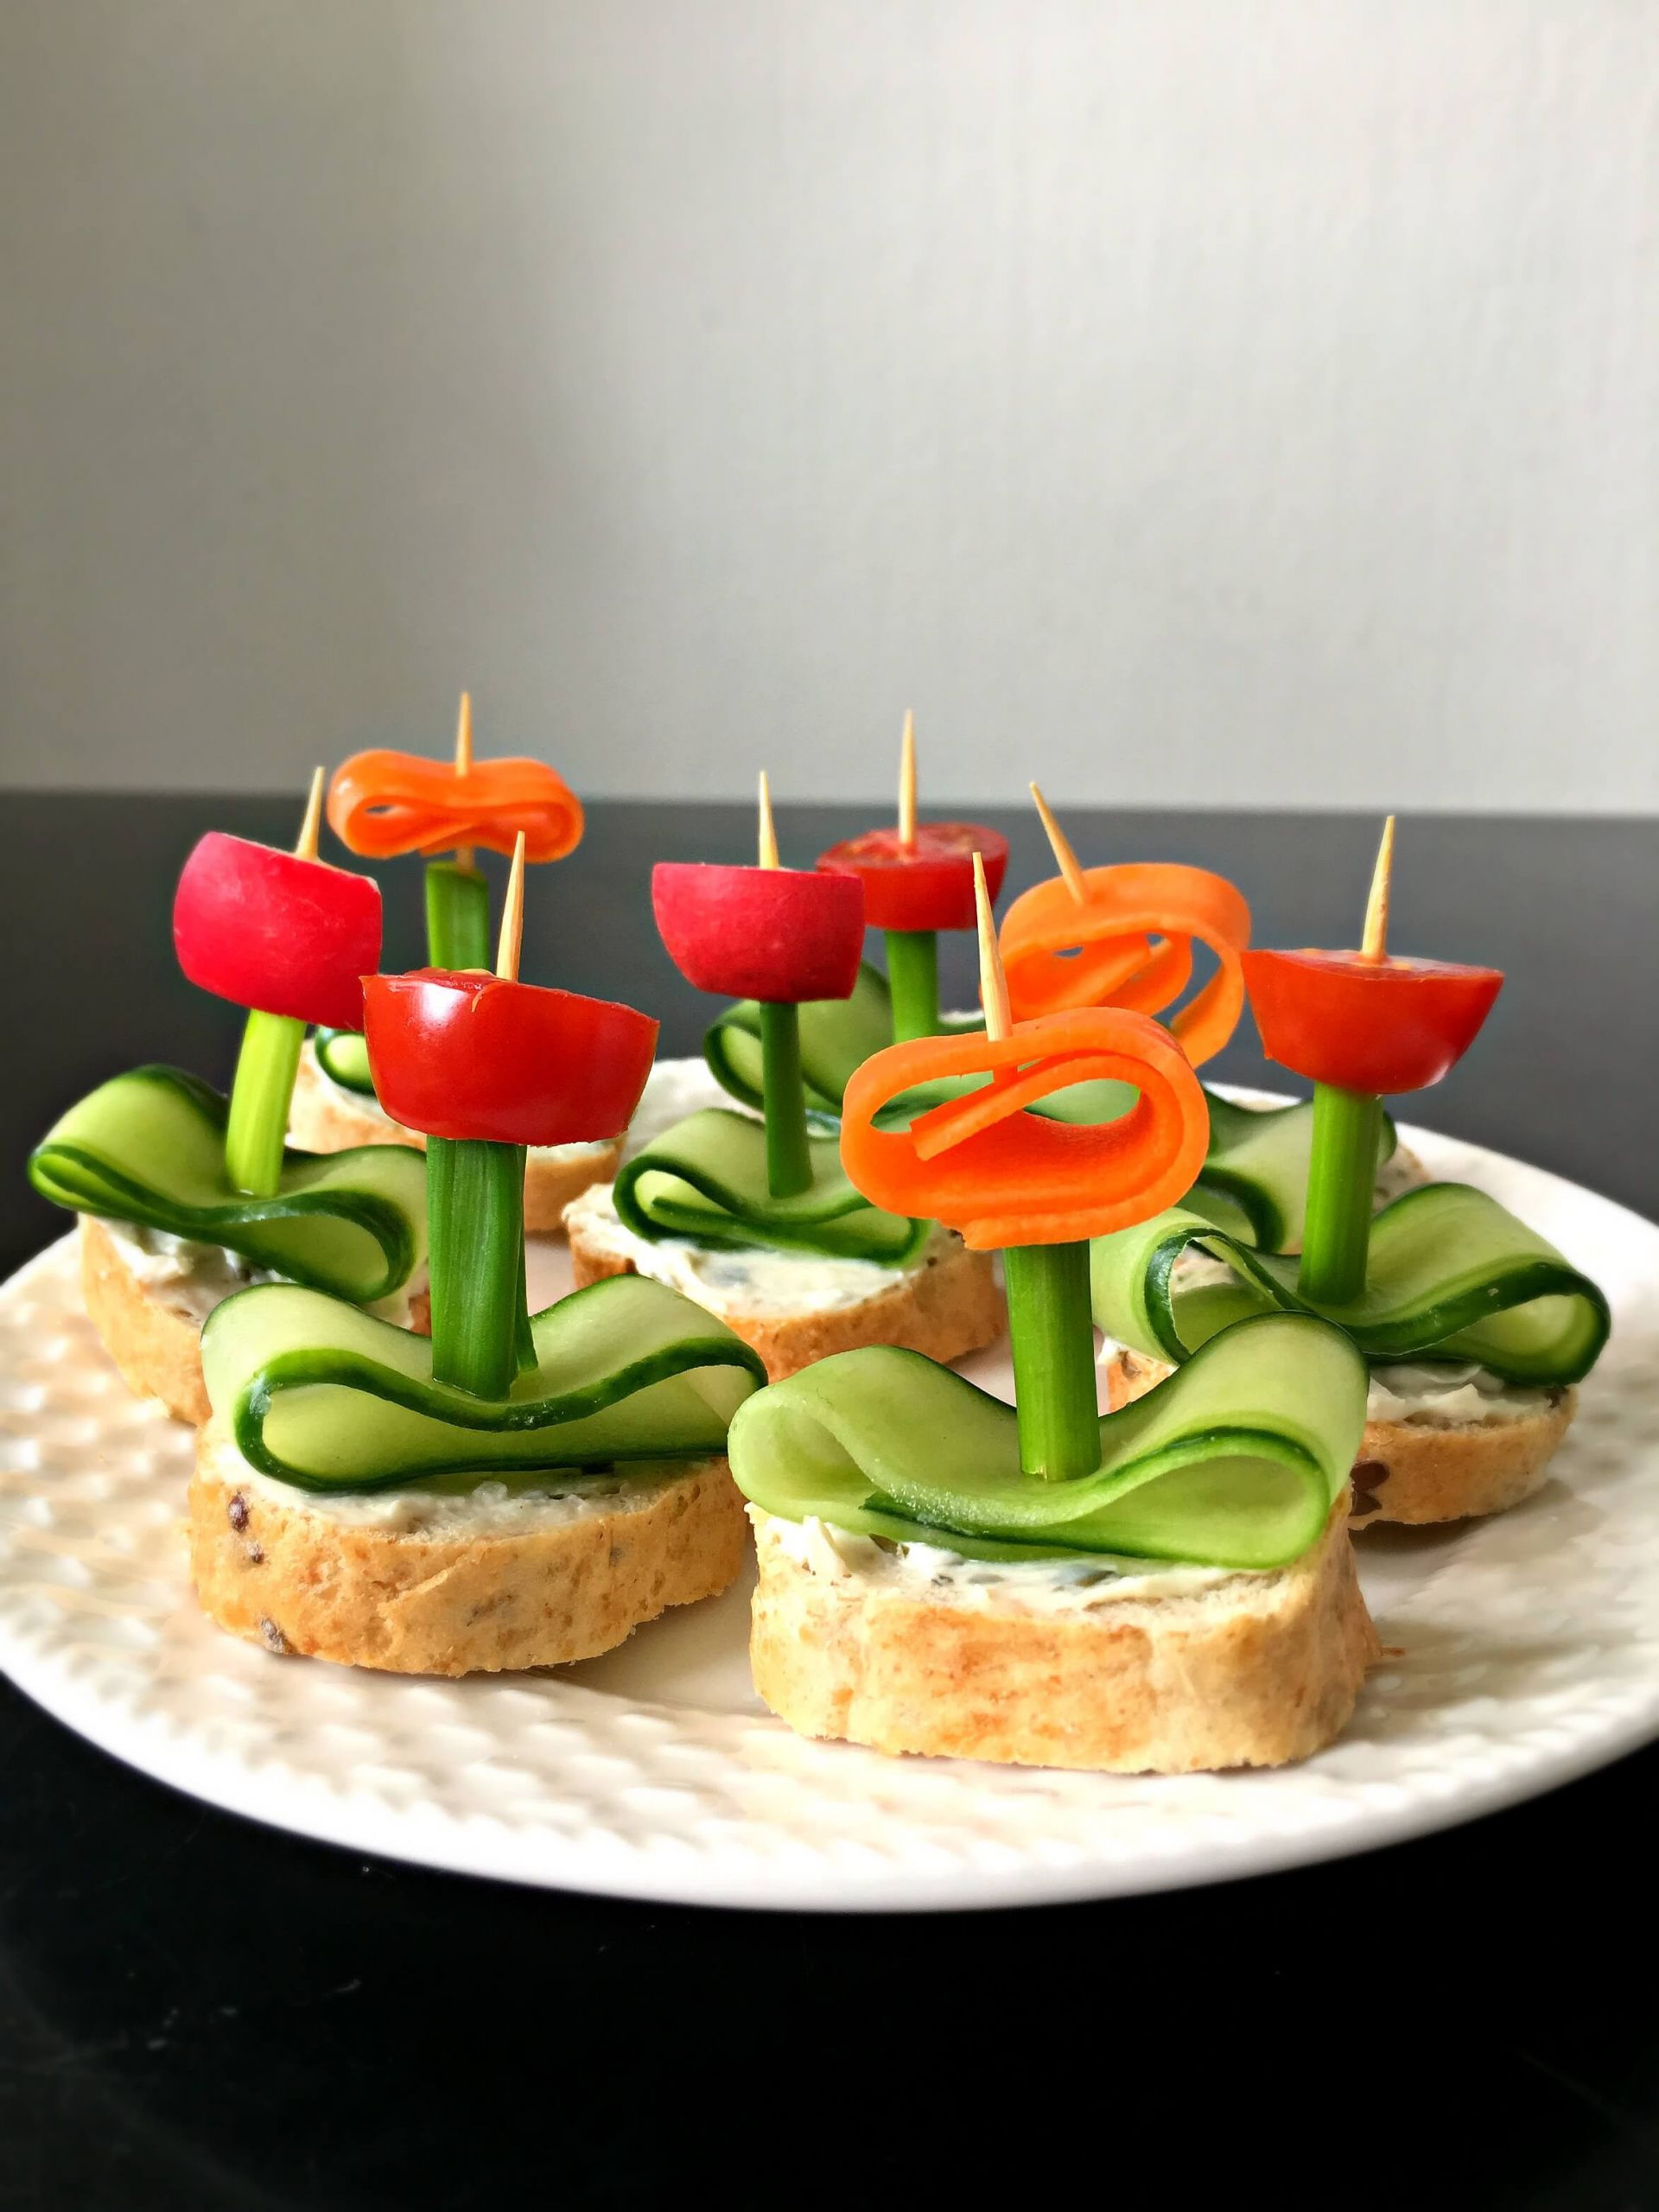 Vegetable Appetizers Finger Food
 Vegan Flower Appetizers with Herb "Cream Cheese"